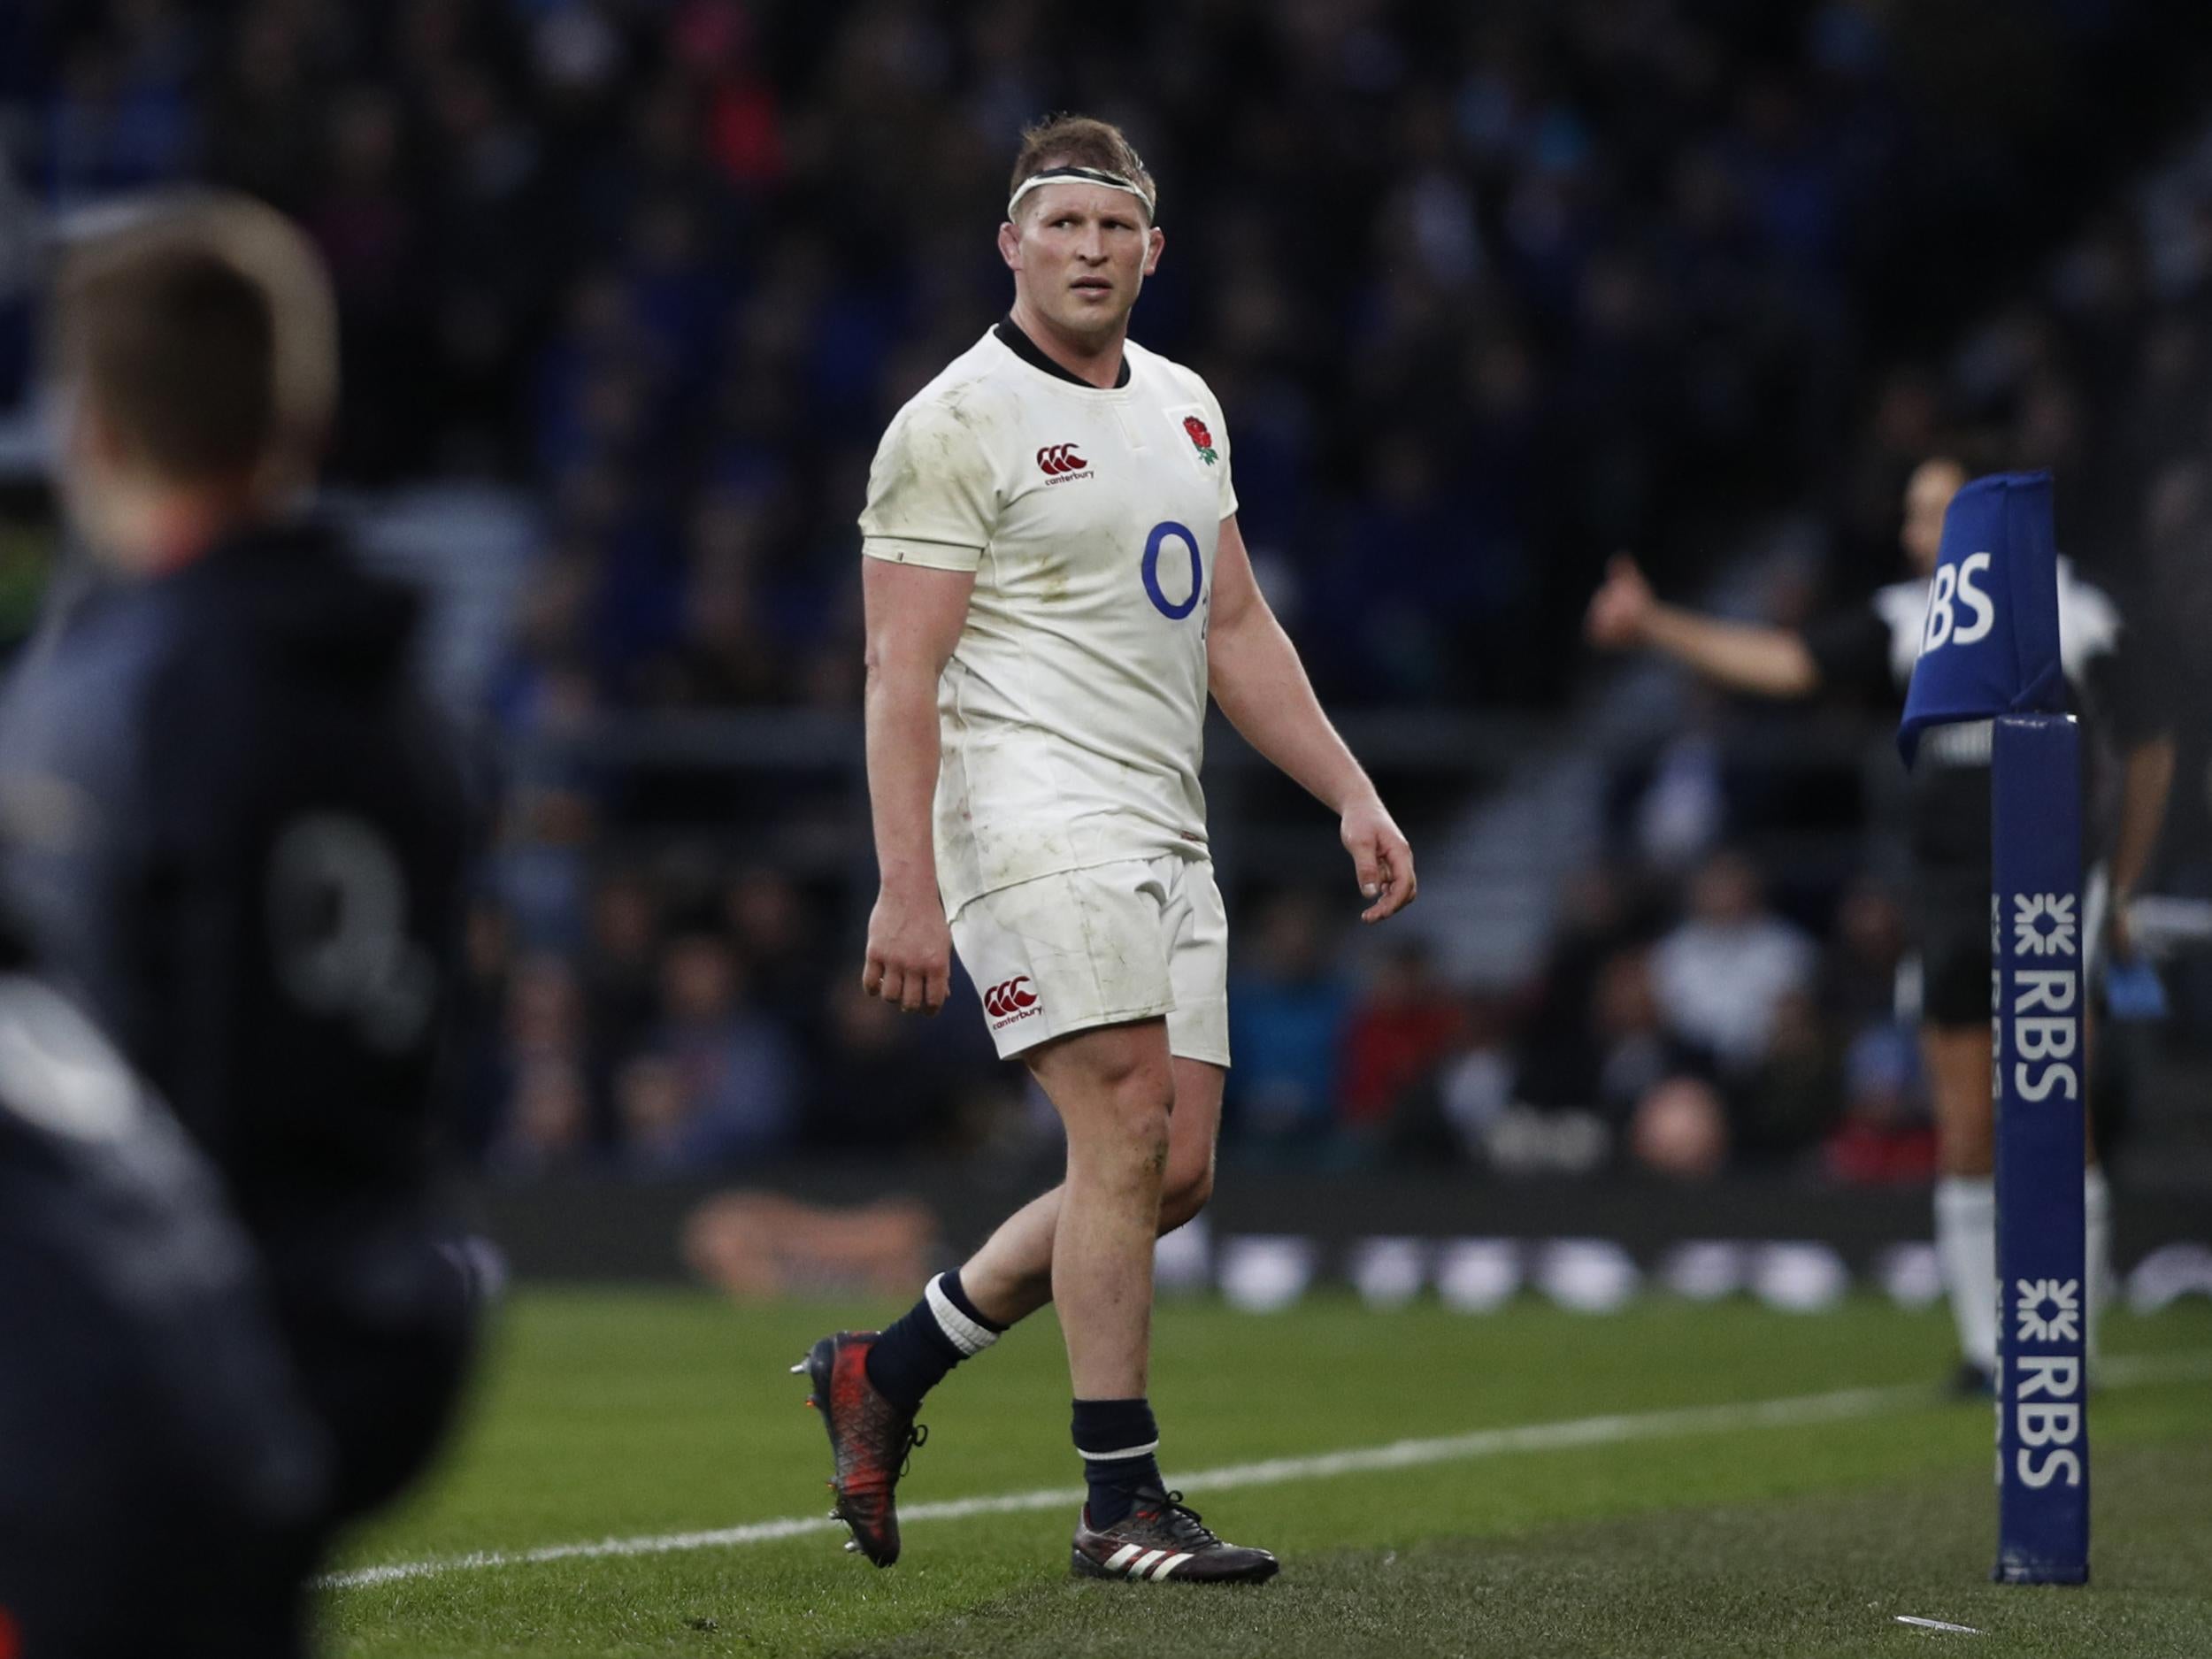 Hartley hopes to beat Ireland in their own backyard